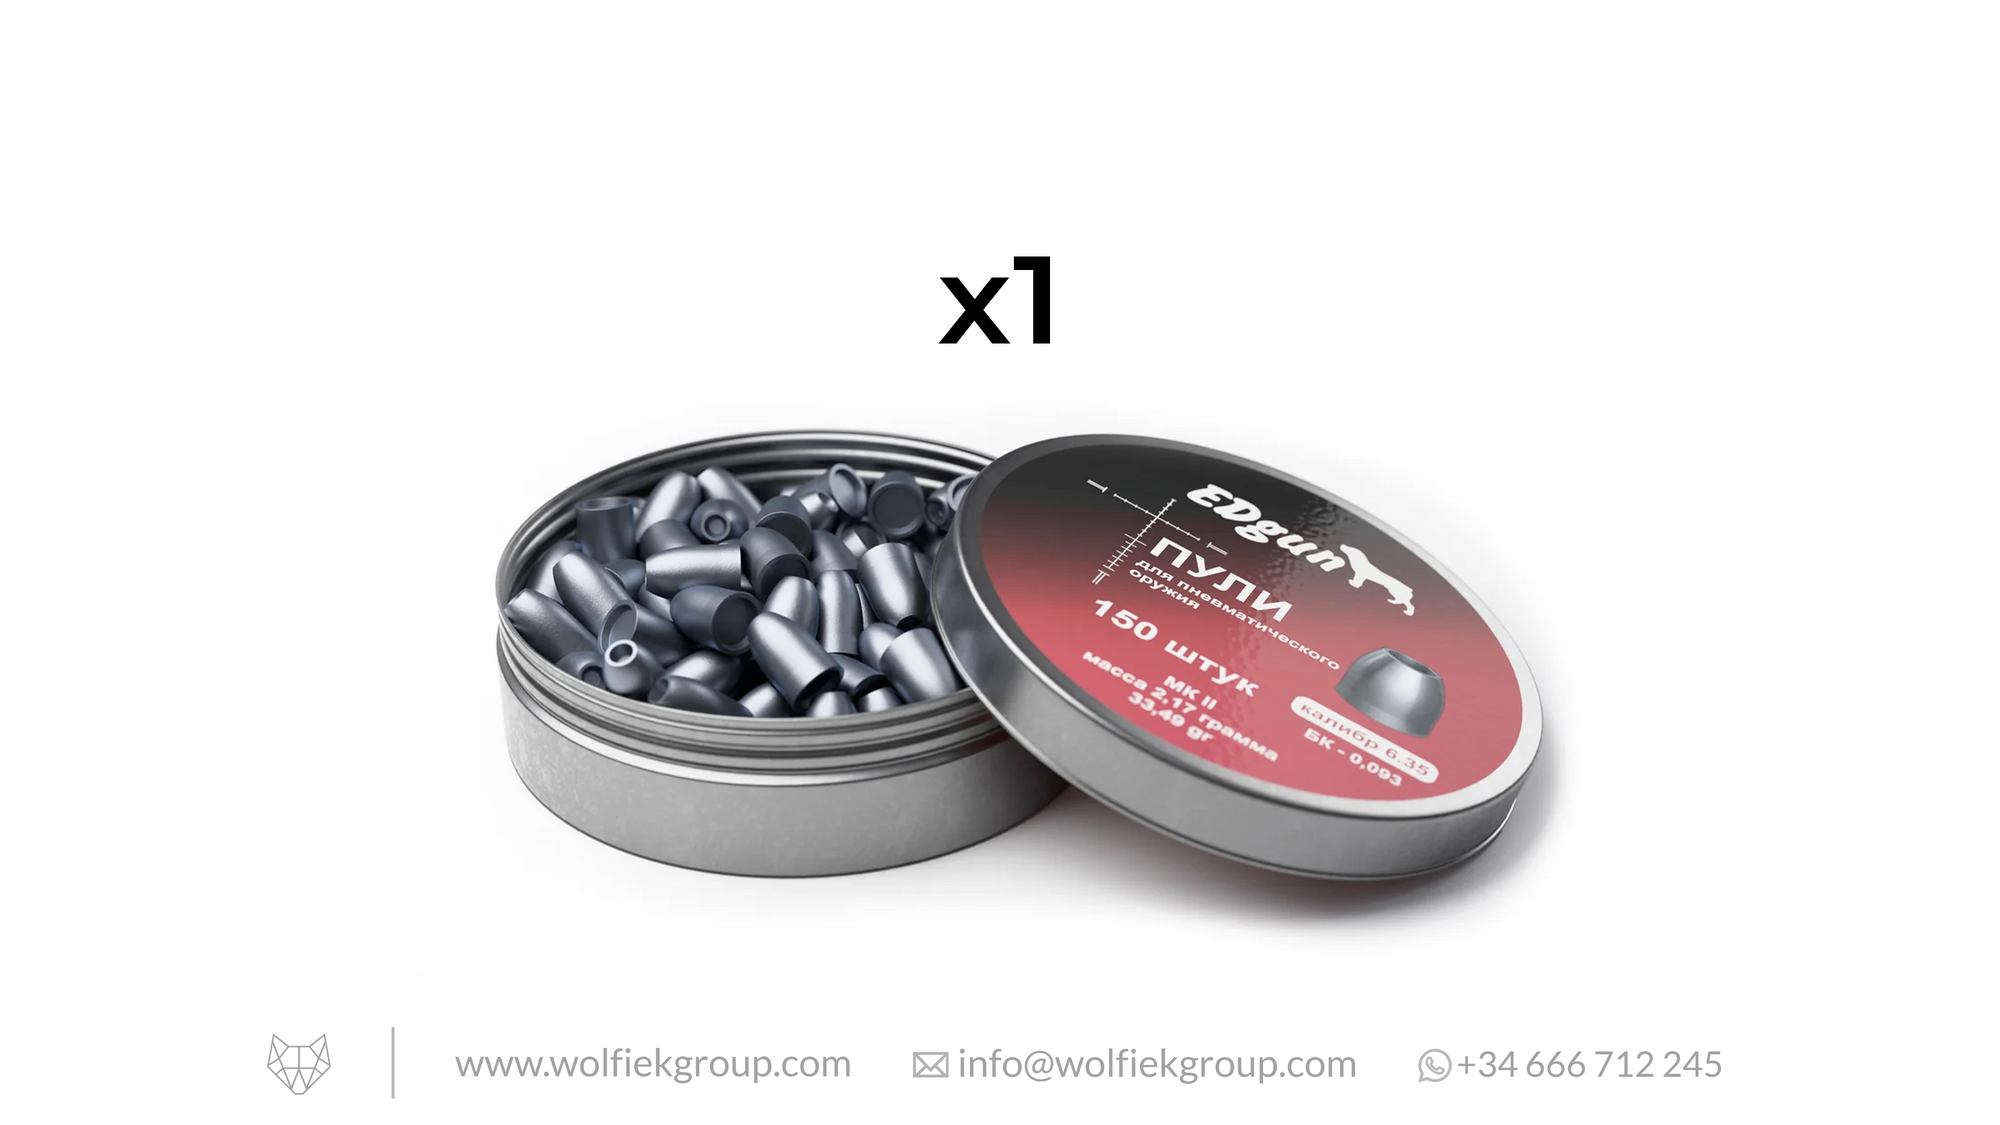 EDgun KnockOut Slugs Cal .250 (6,35mm) Weight 2,17g (33,49gr) MKII with text buy 4 get 1 for free